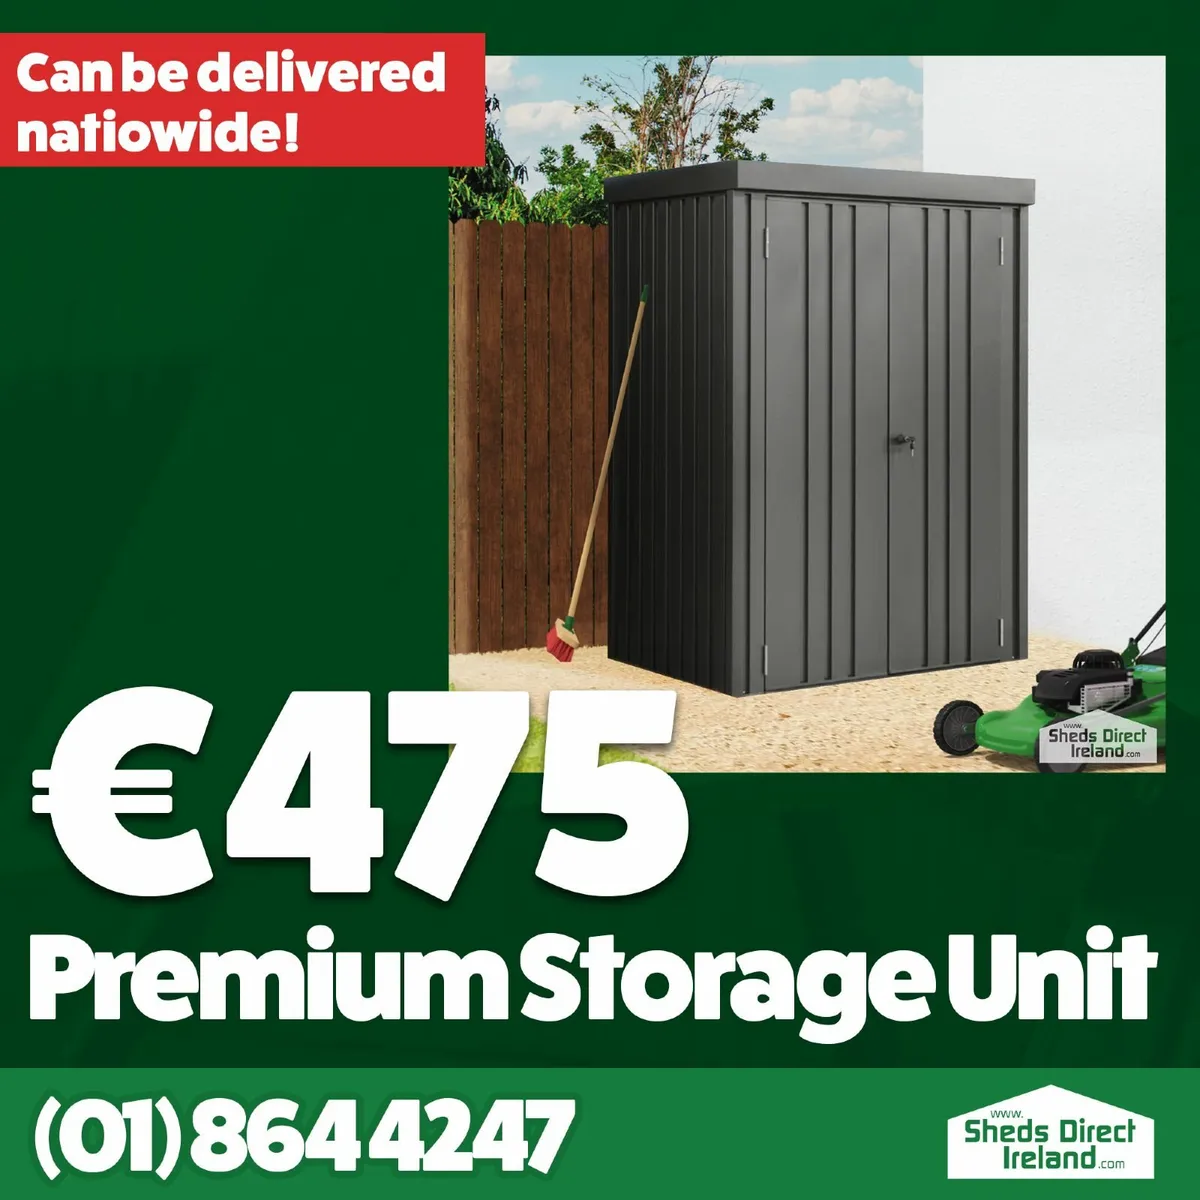 Premium Storage Unit - The Mabelle (NEW PRODUCT)